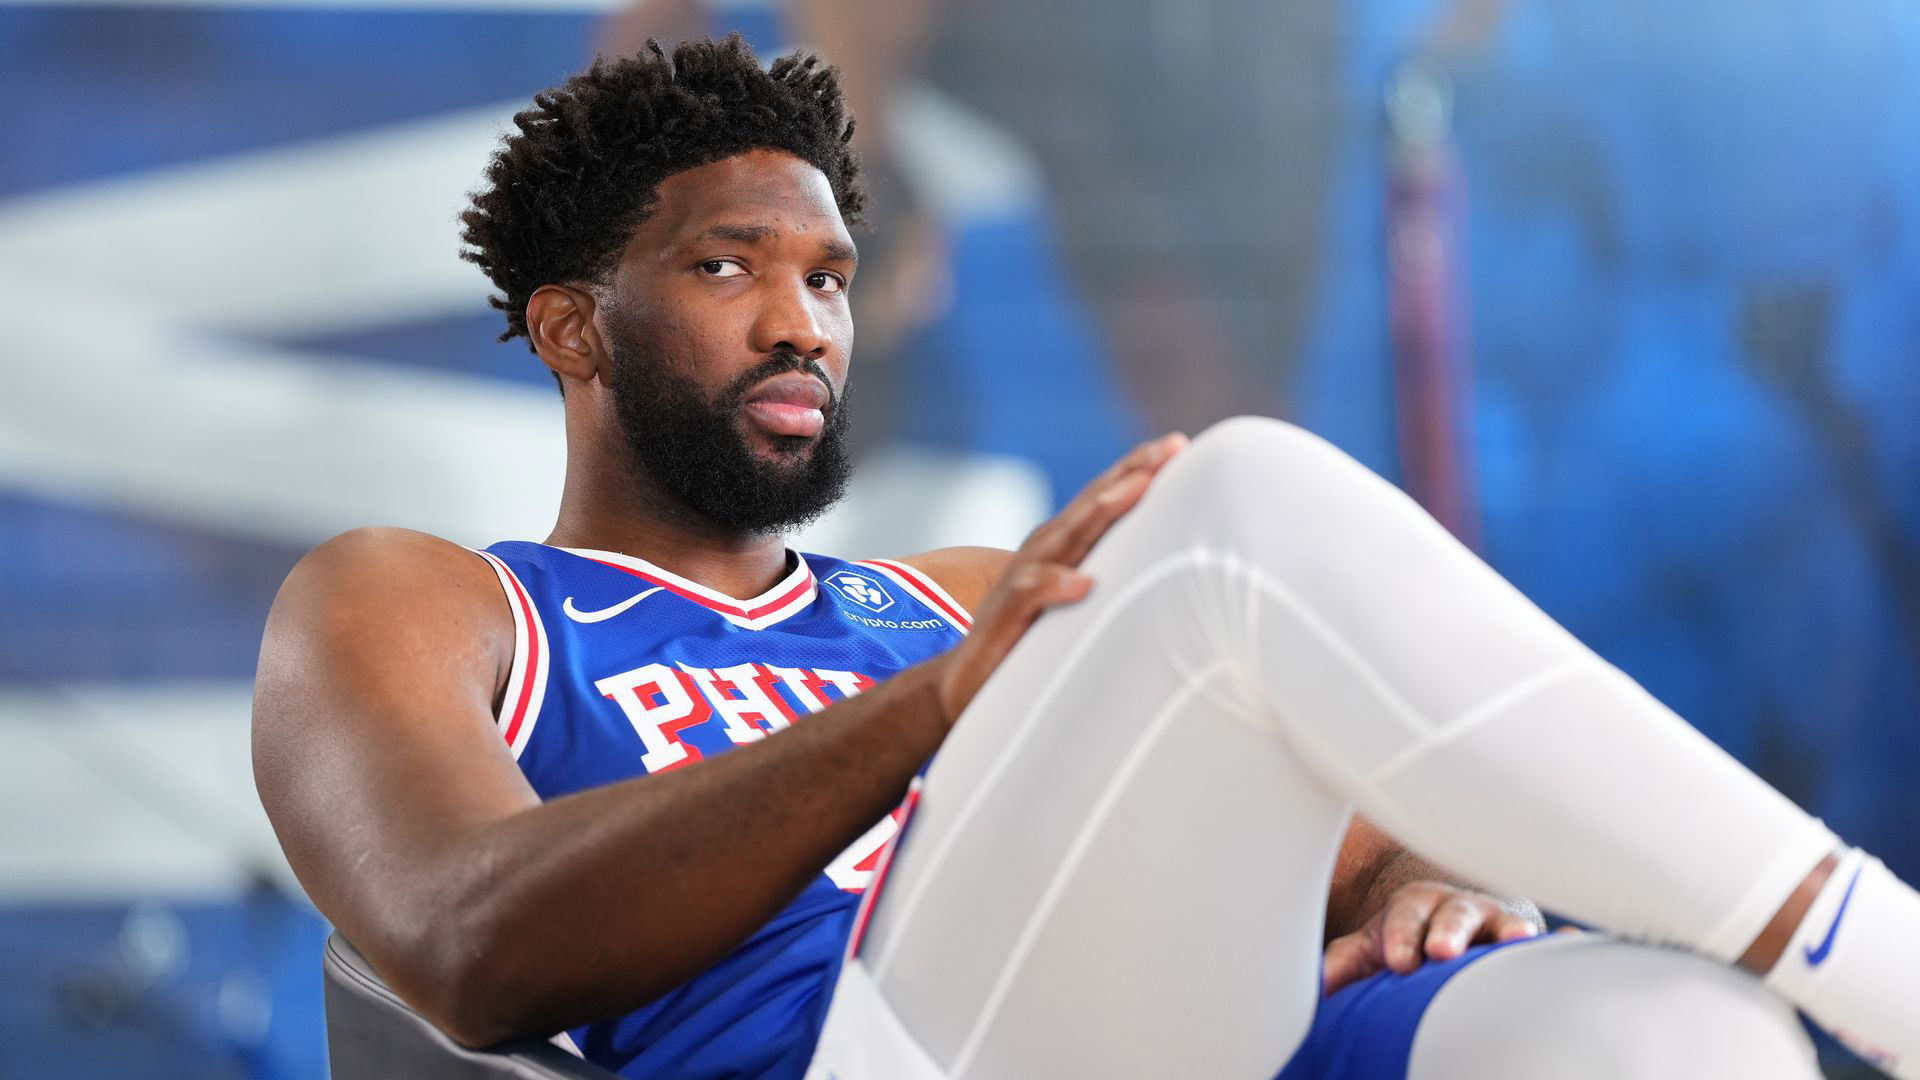 Joel Embiid likely to decide in next few days on 2024 Olympics